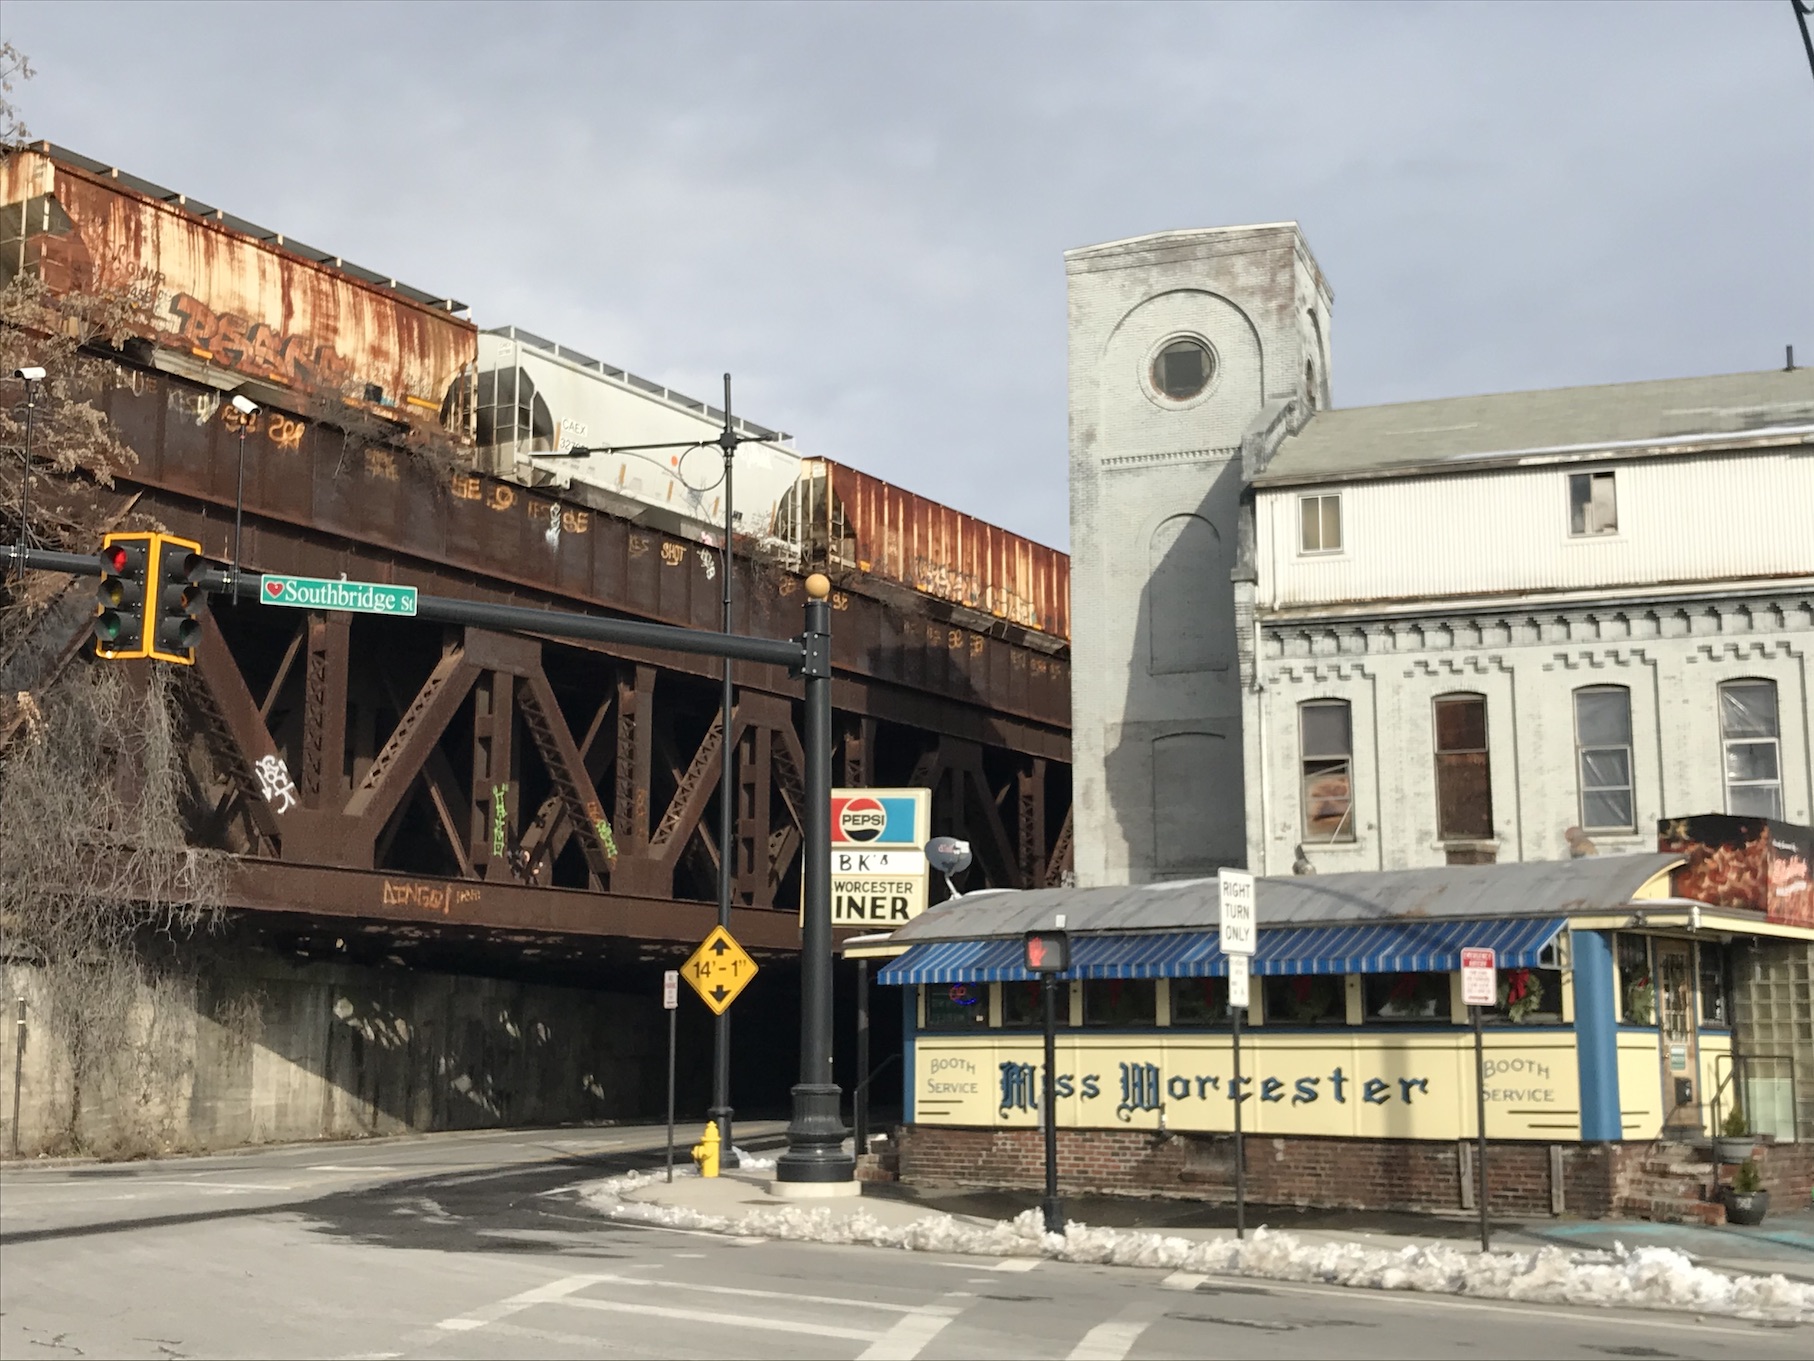 The Miss Worcester Diner and the Southbridge Street rail viaducts